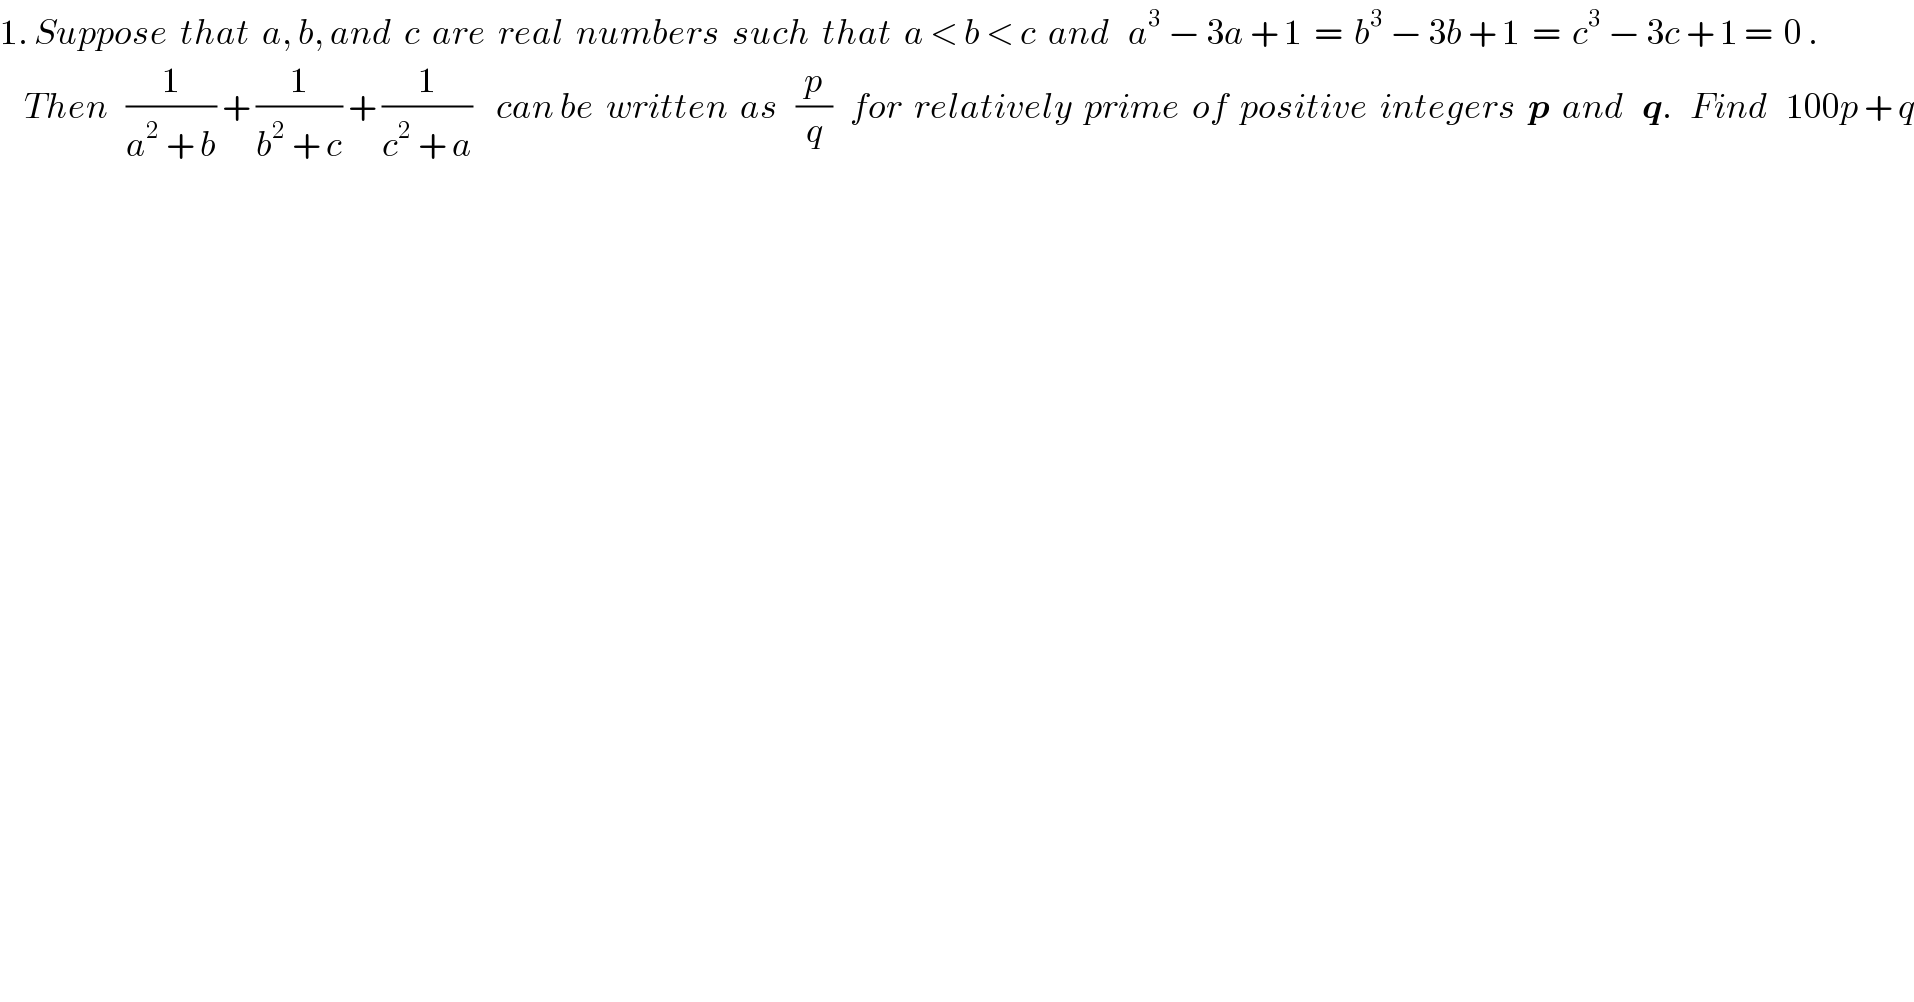 1. Suppose  that  a, b, and  c  are  real  numbers  such  that  a < b < c  and   a^3  − 3a + 1  =  b^3  − 3b + 1  =  c^3  − 3c + 1 =  0 .      Then   (1/(a^2  + b)) + (1/(b^2  + c)) + (1/(c^2  + a))    can be  written  as   (p/q)   for  relatively  prime  of  positive  integers  p  and   q.   Find   100p + q  